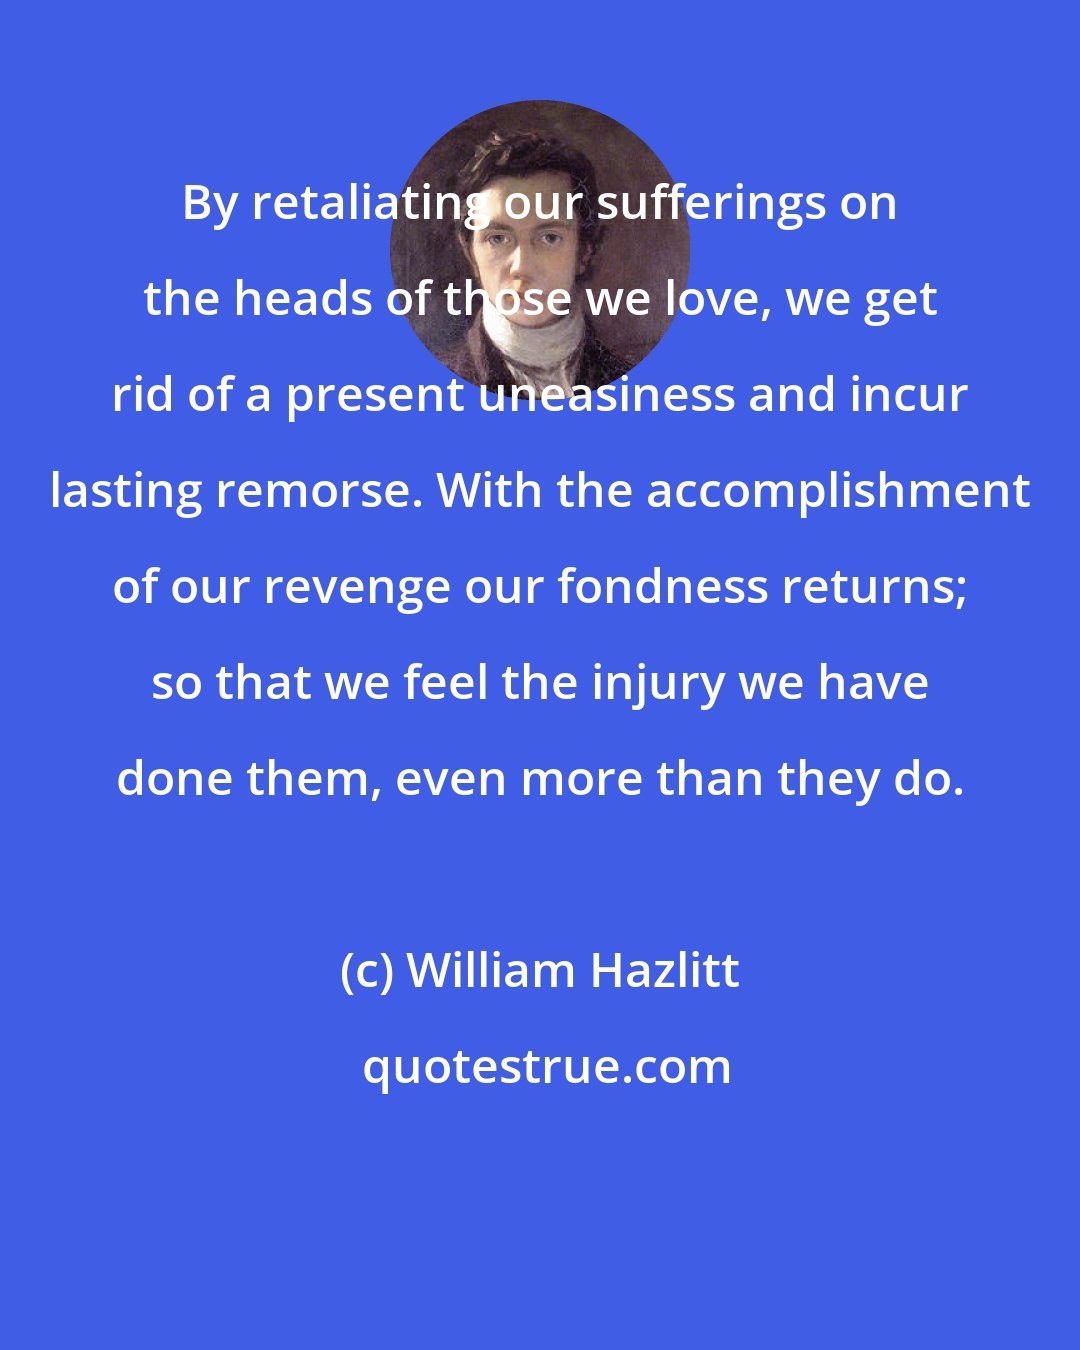 William Hazlitt: By retaliating our sufferings on the heads of those we love, we get rid of a present uneasiness and incur lasting remorse. With the accomplishment of our revenge our fondness returns; so that we feel the injury we have done them, even more than they do.